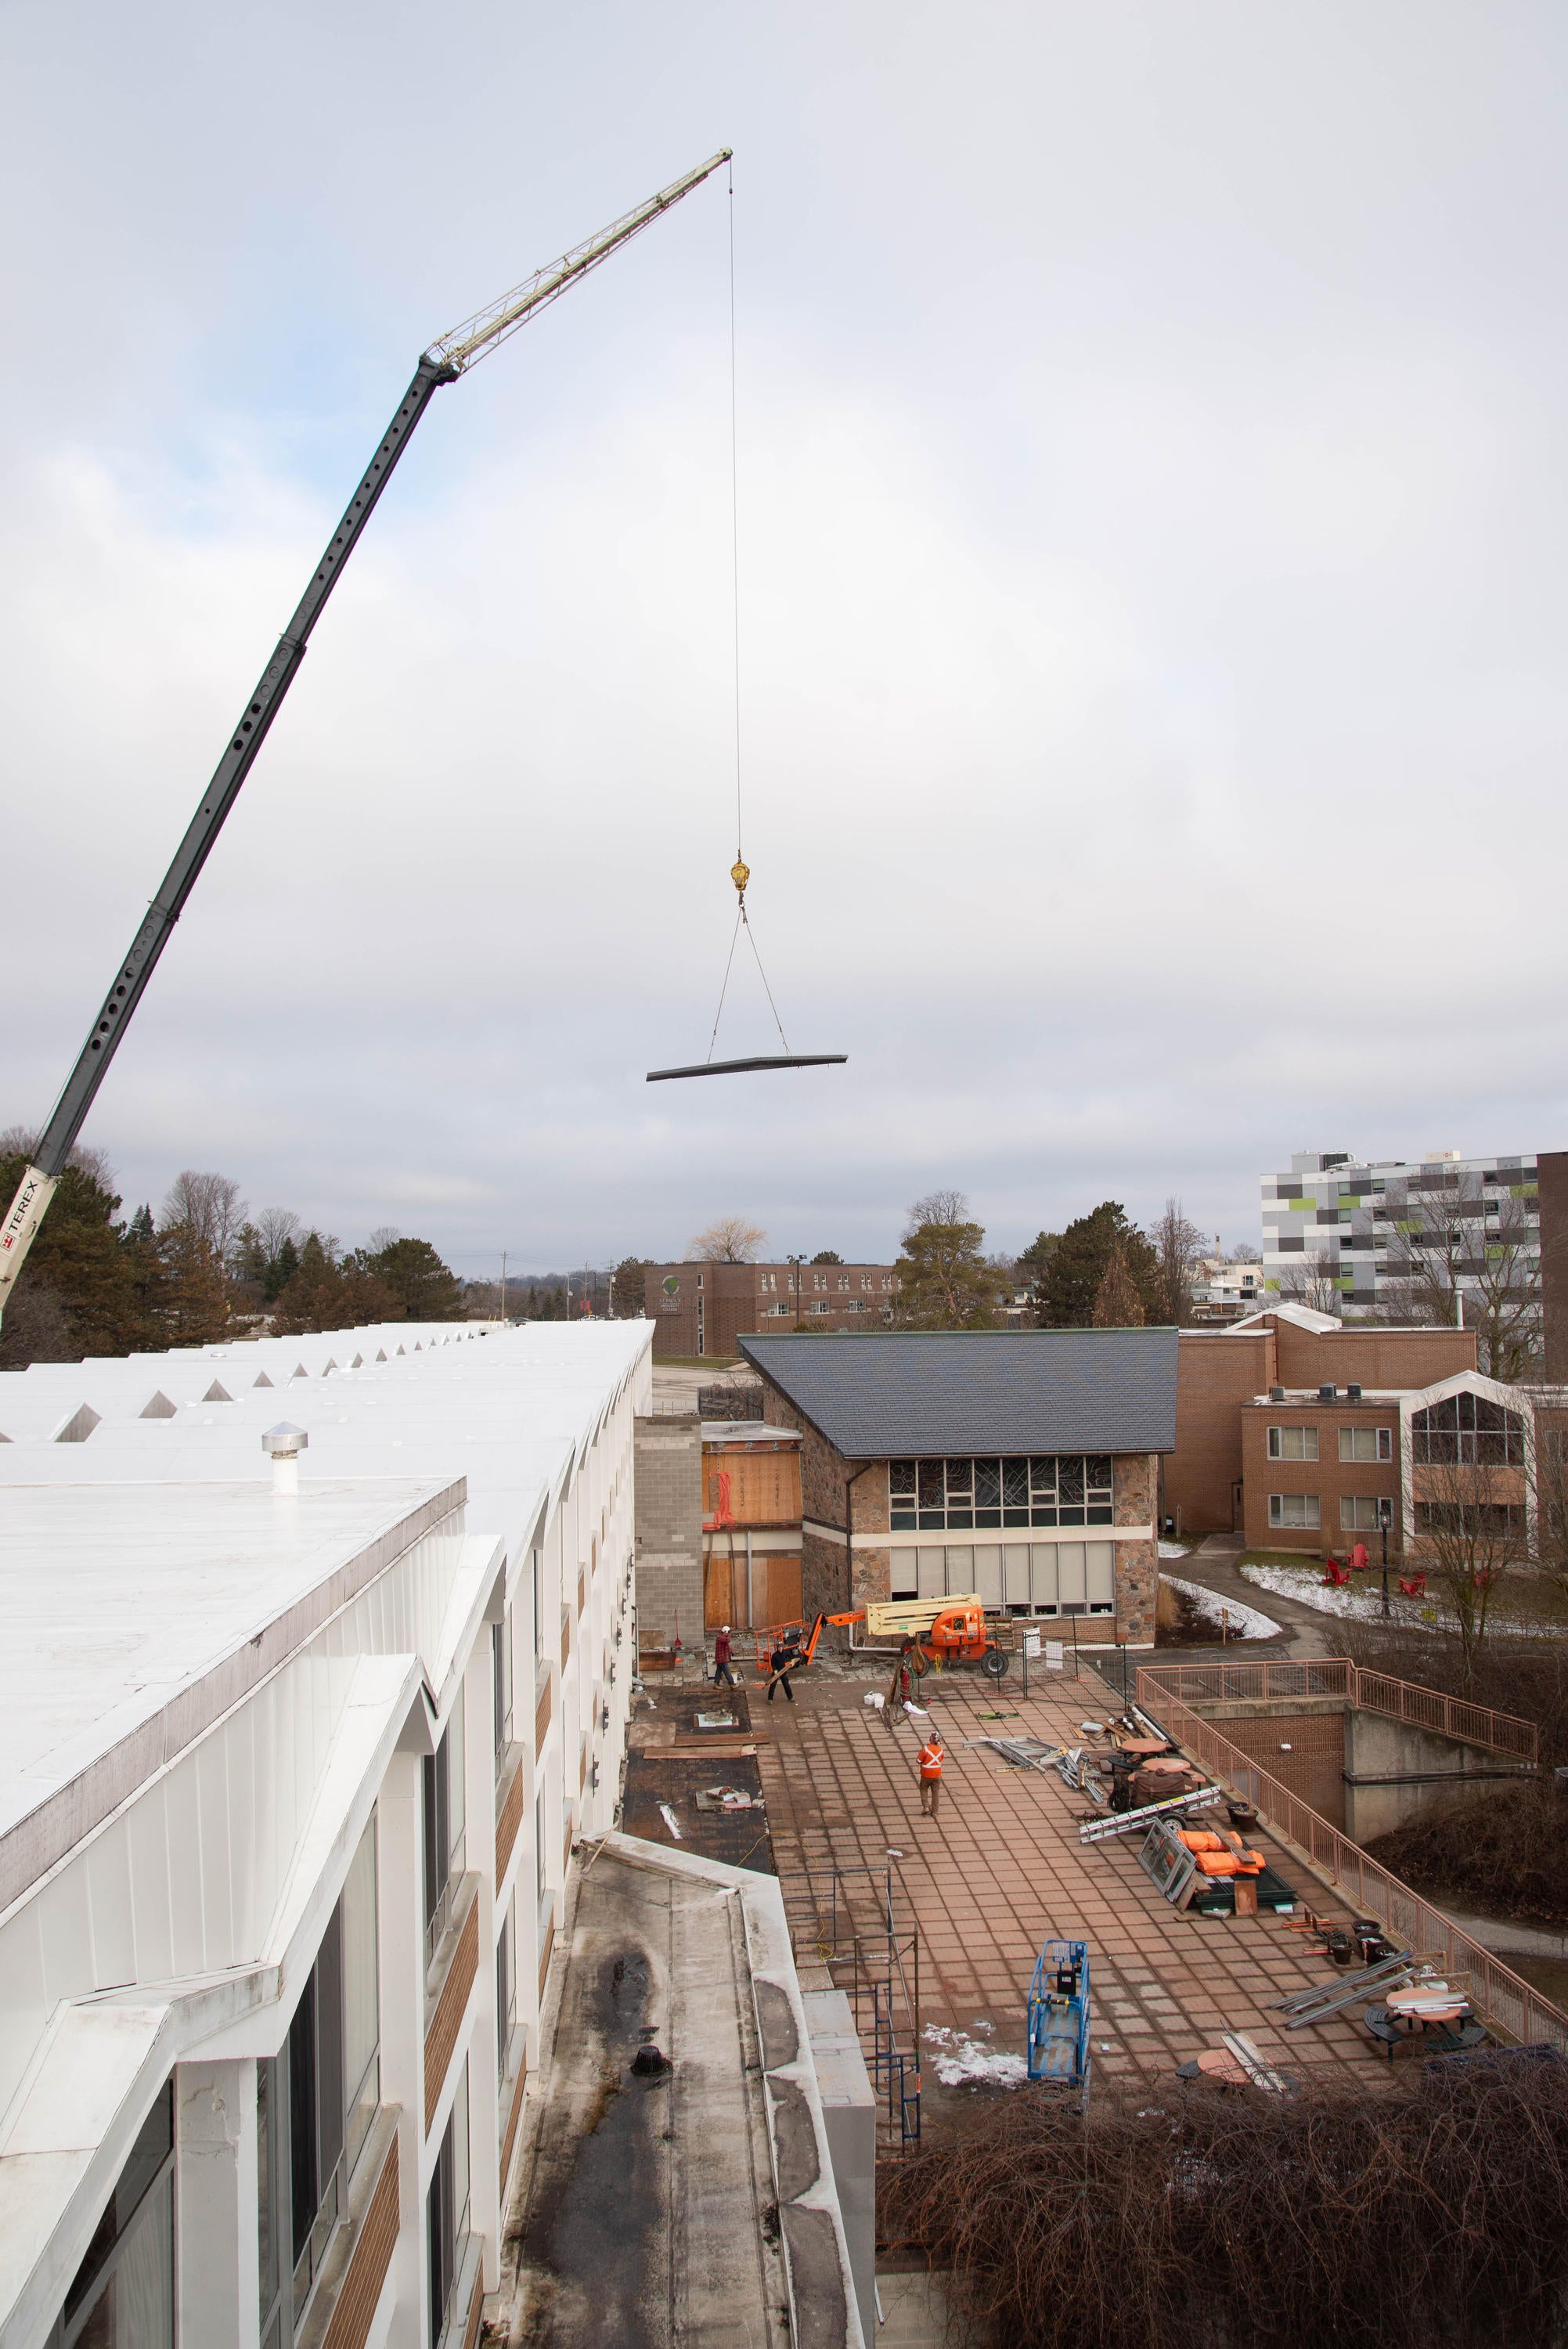 A crane towers over the residence building, carrying steal beams to the patio